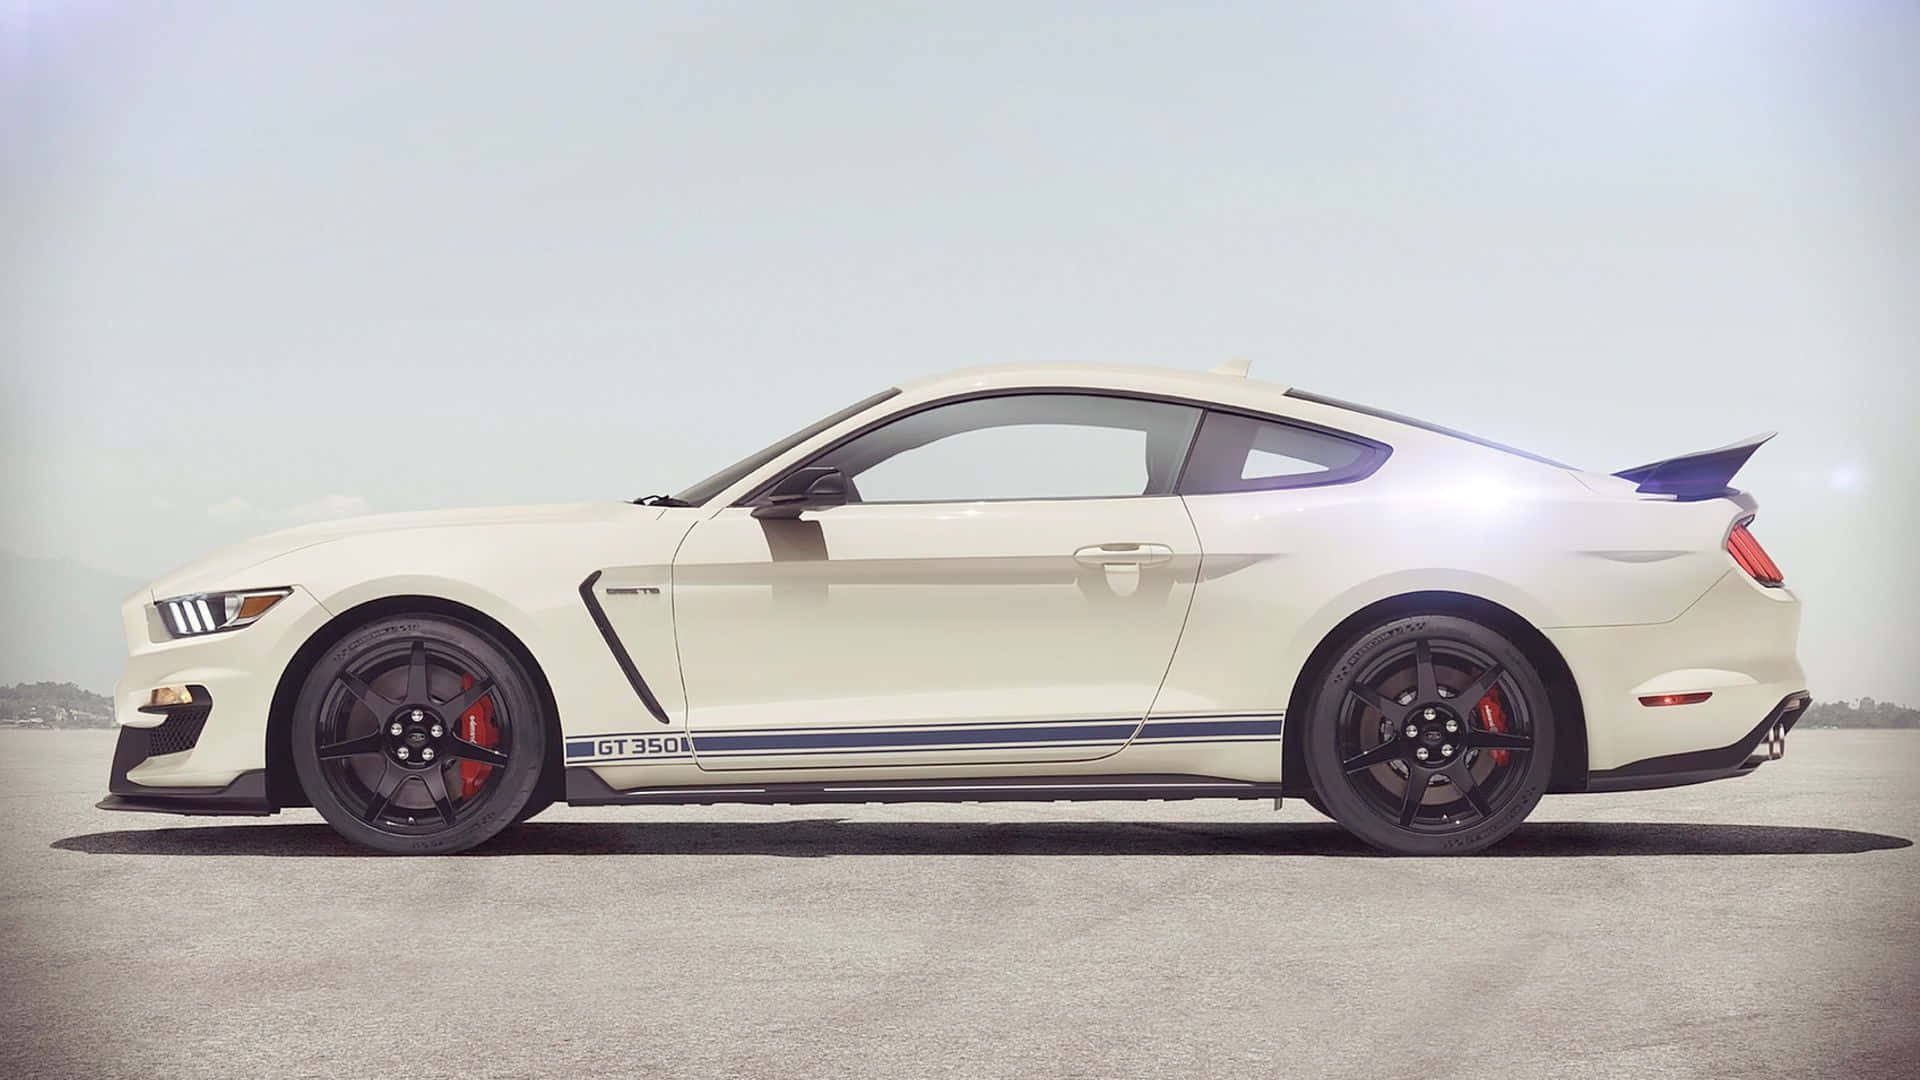 Sleek Ford Mustang Shelby GT350 in Motion Wallpaper